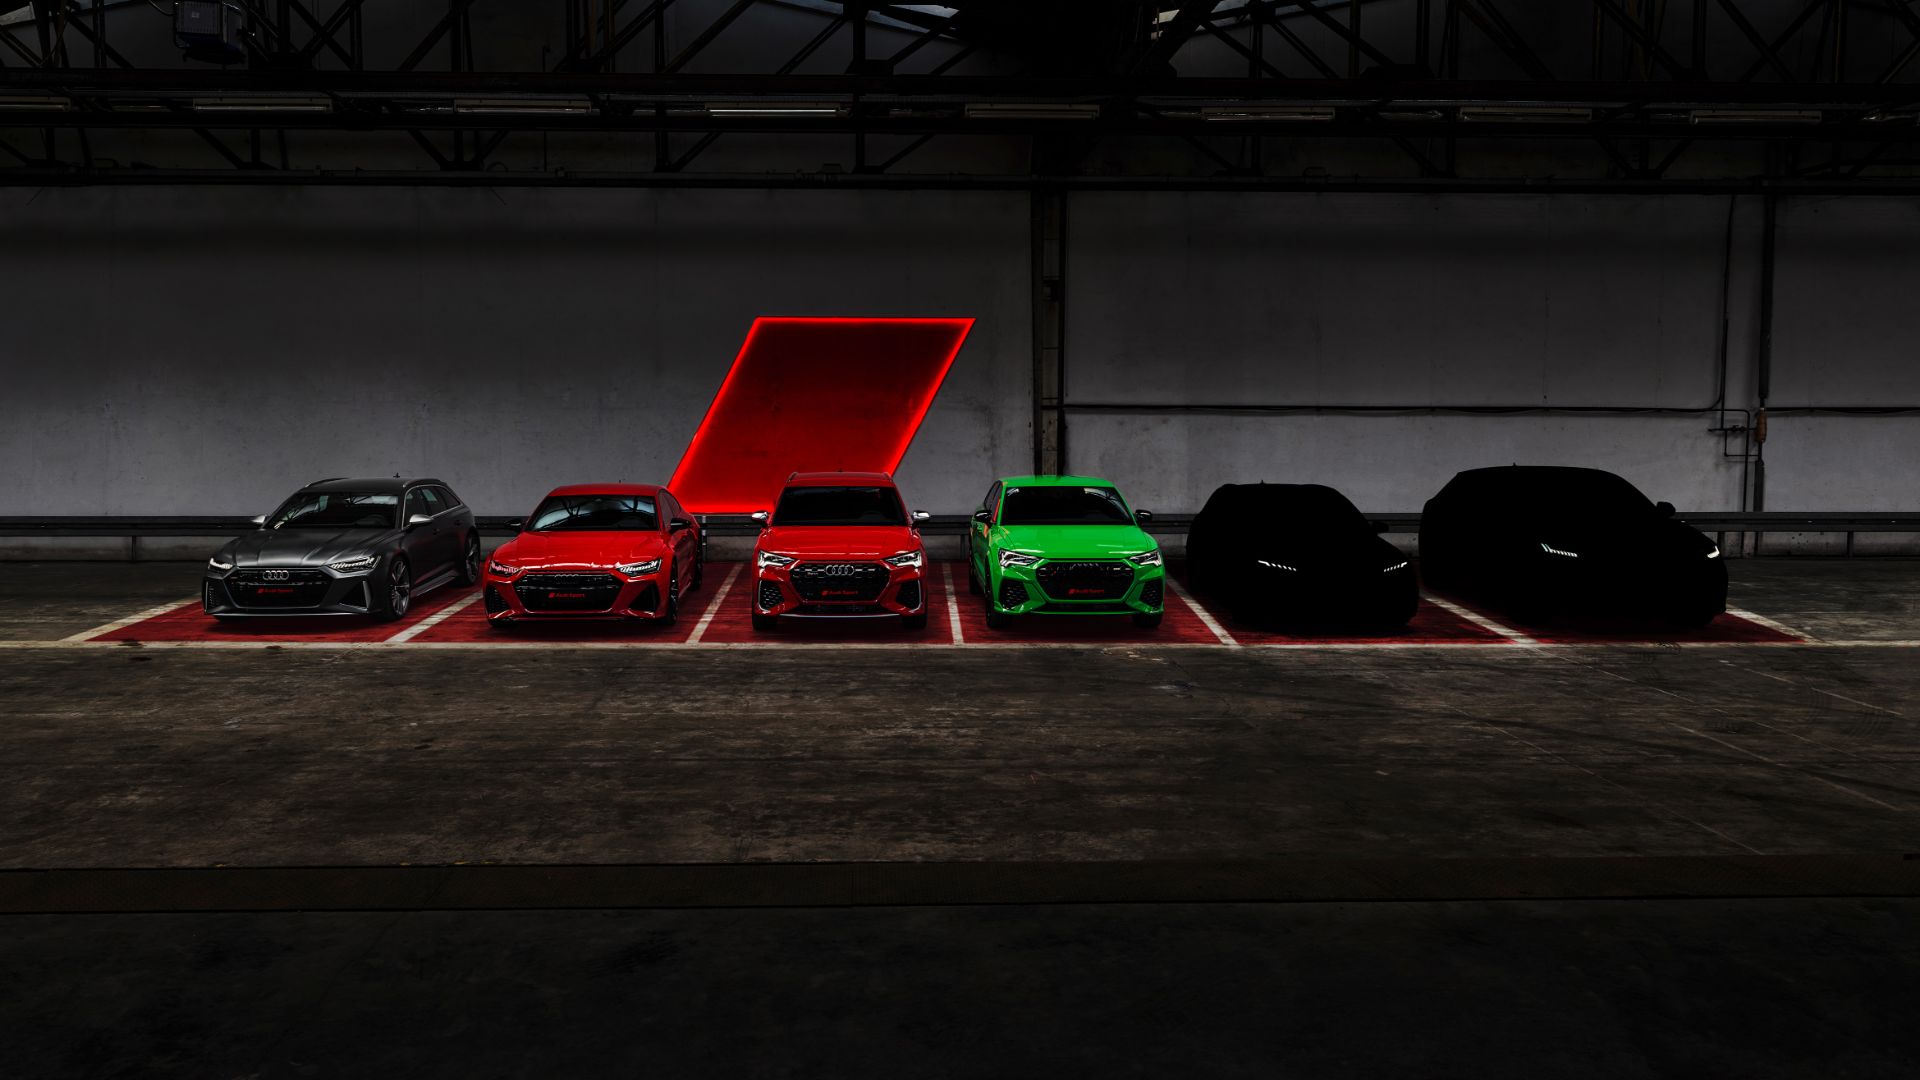 25 years of Audi RS